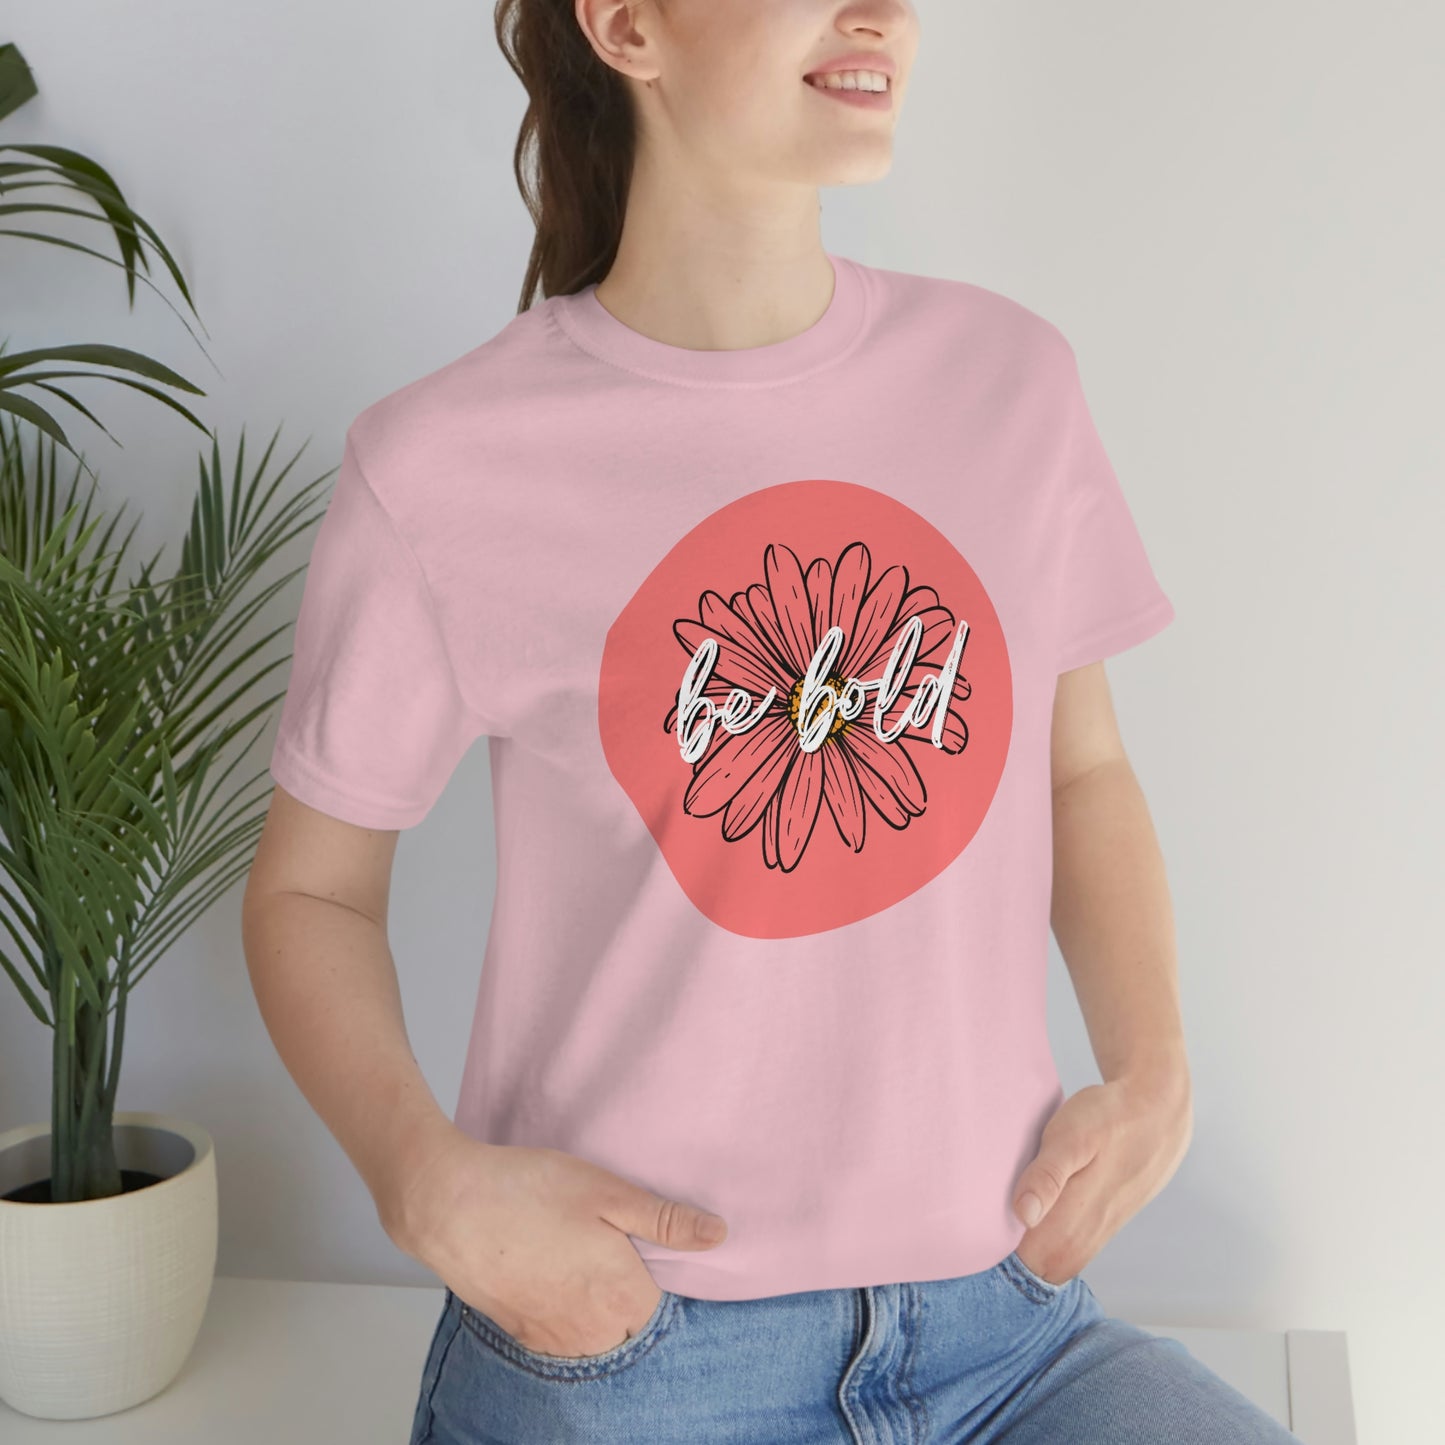 Be Bold Coral Daisy Floral Positive Message Unisex Jersey Short Sleeve Tee Small-3XL